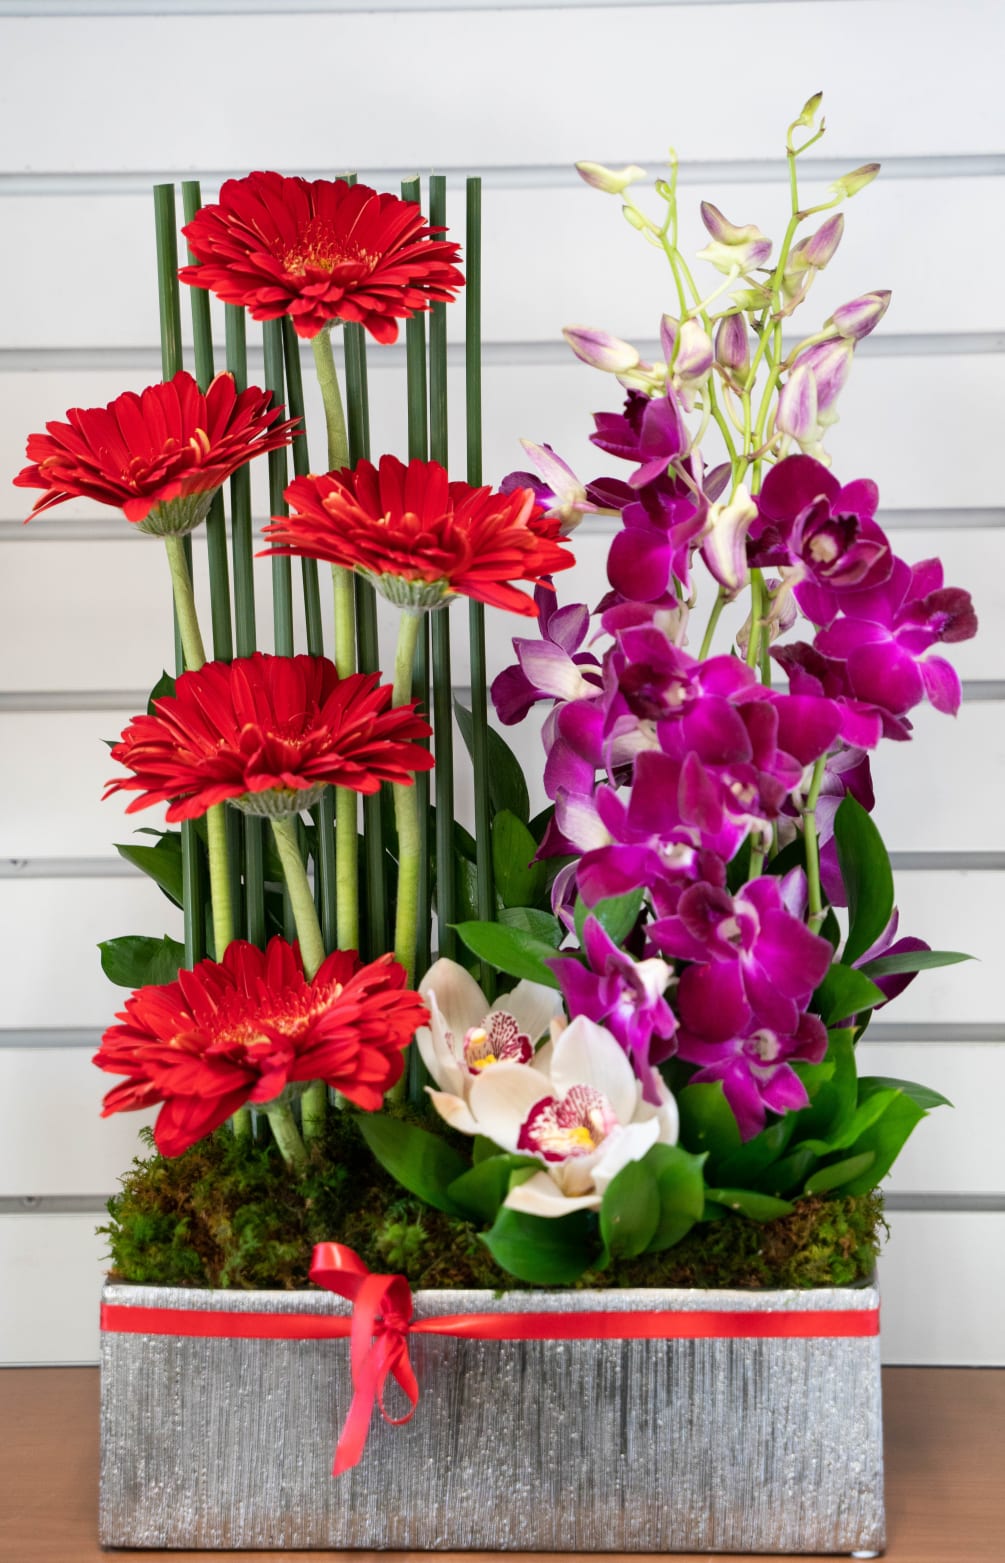 A vertical design of gerbers, dendrobium orchids, cymbidium orchid blooms in a